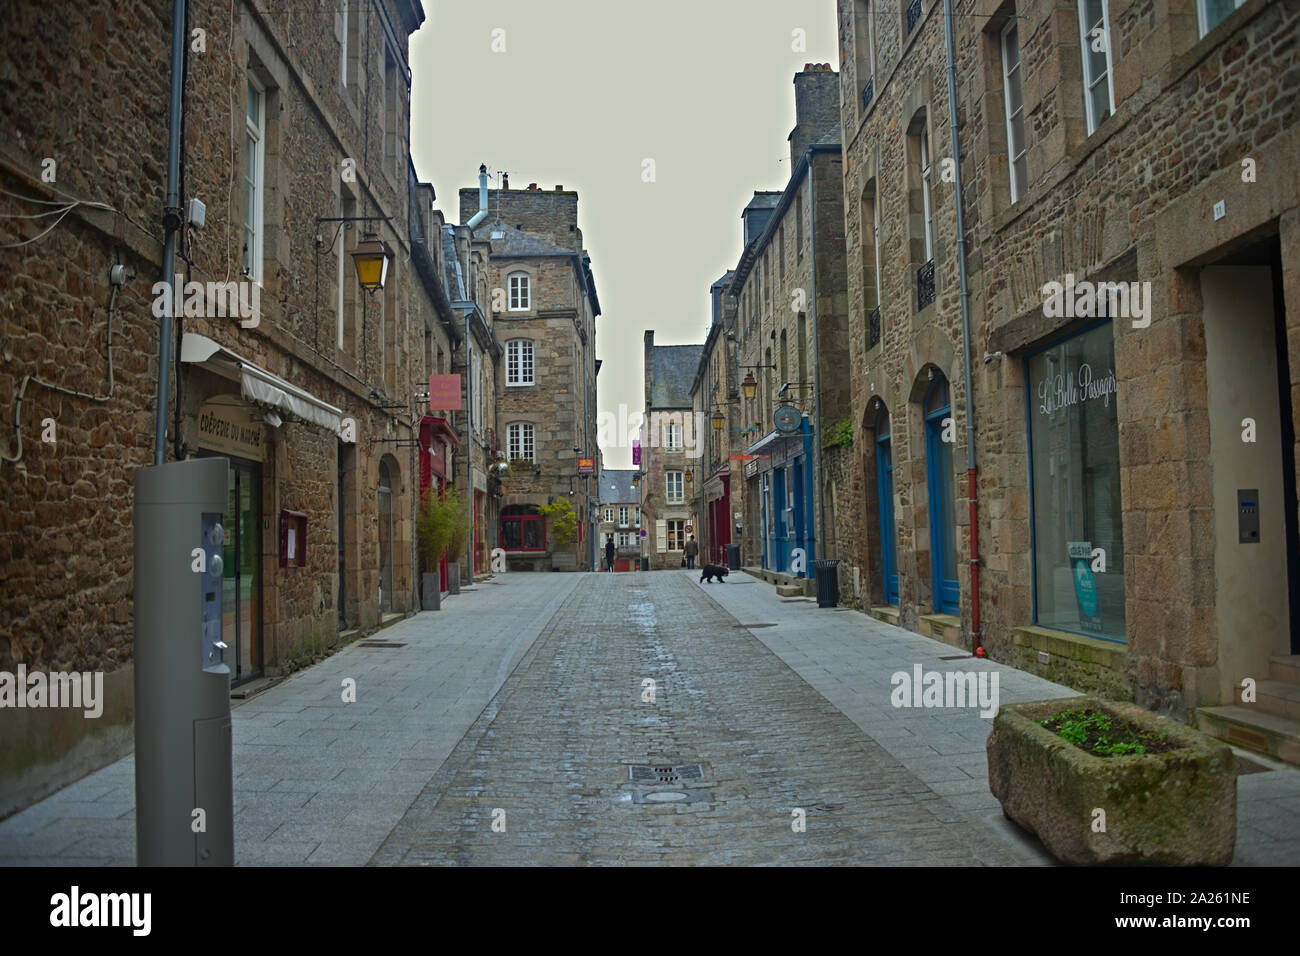 DINAN, FRANCE - April 7th 2019 - Empty street with stone building in traditional town Stock Photo